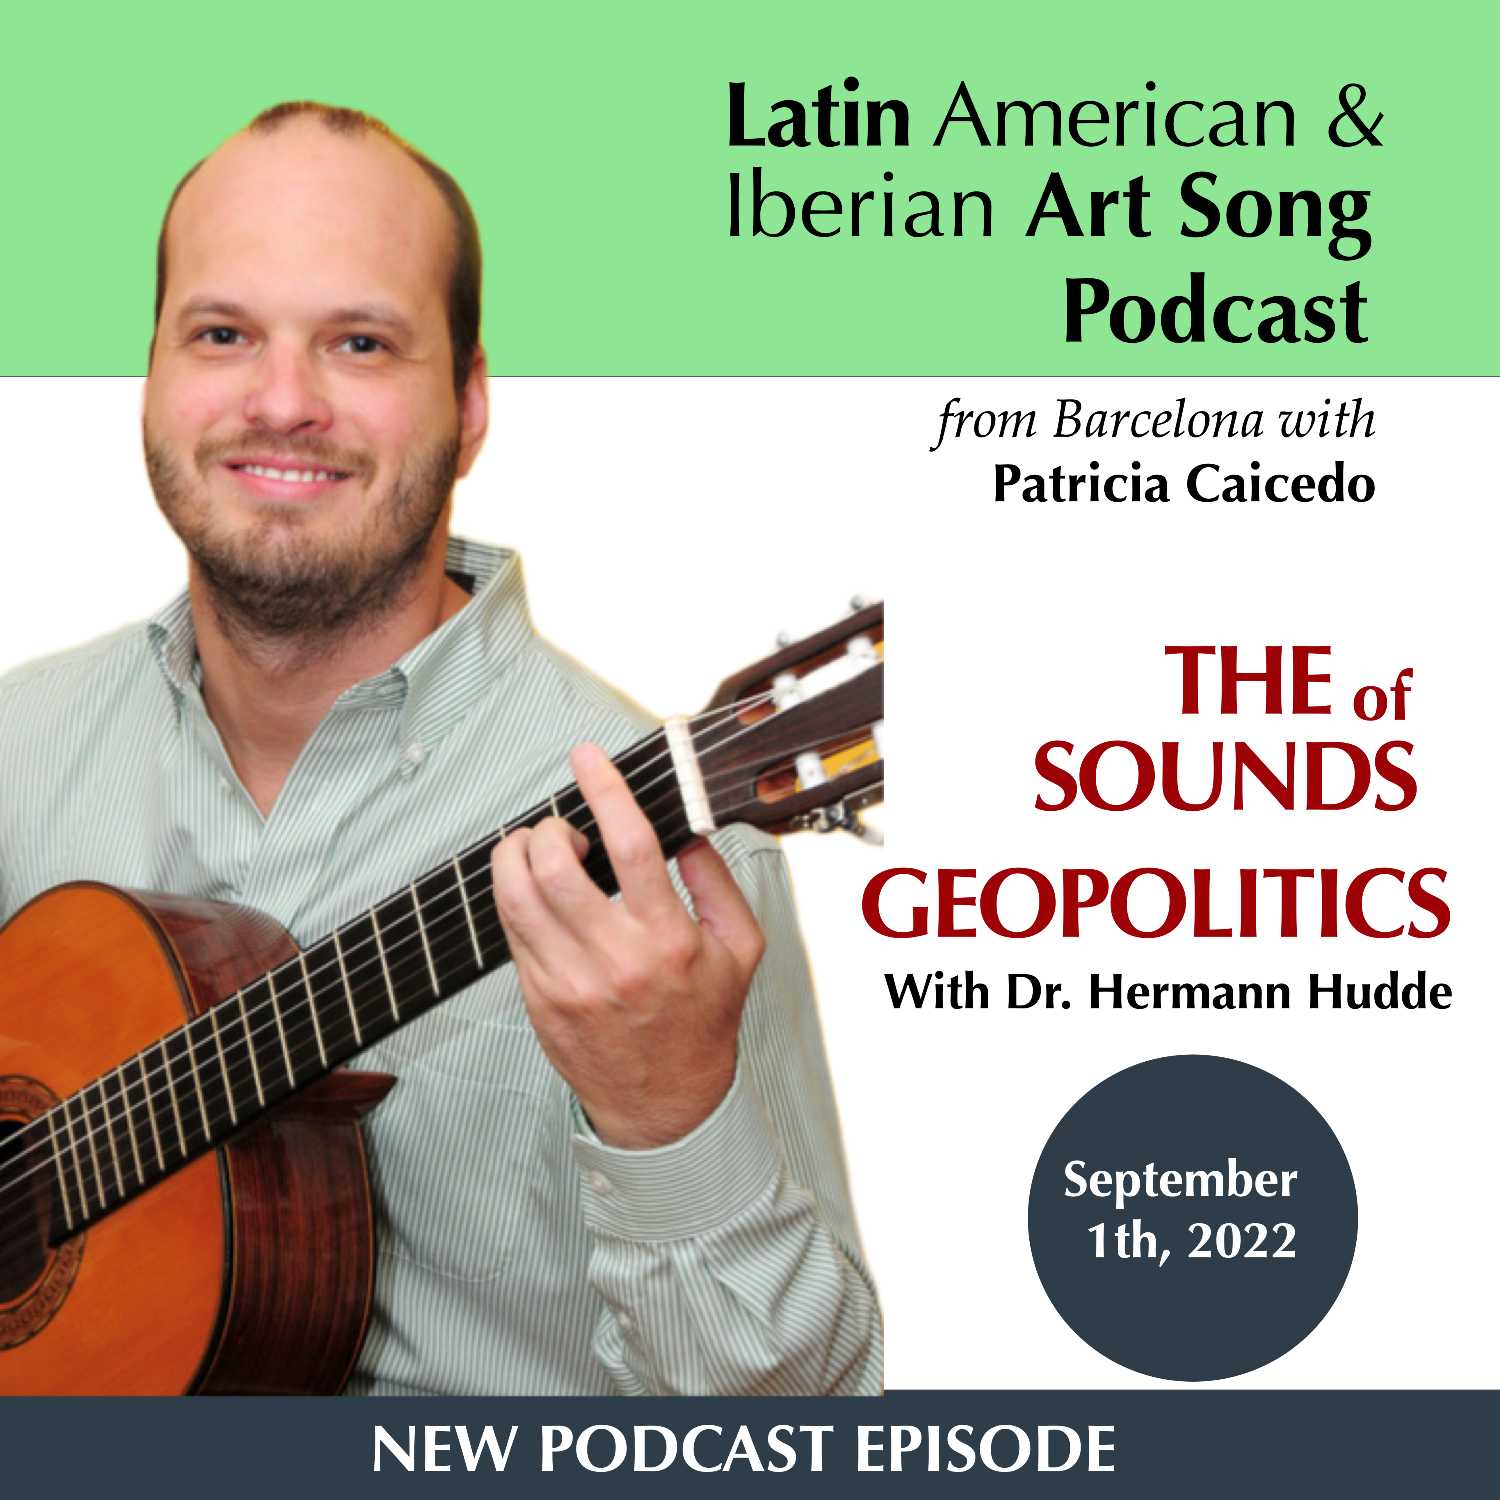 The sounds of geopolitics: cultural diplomacy between Latin America and the US